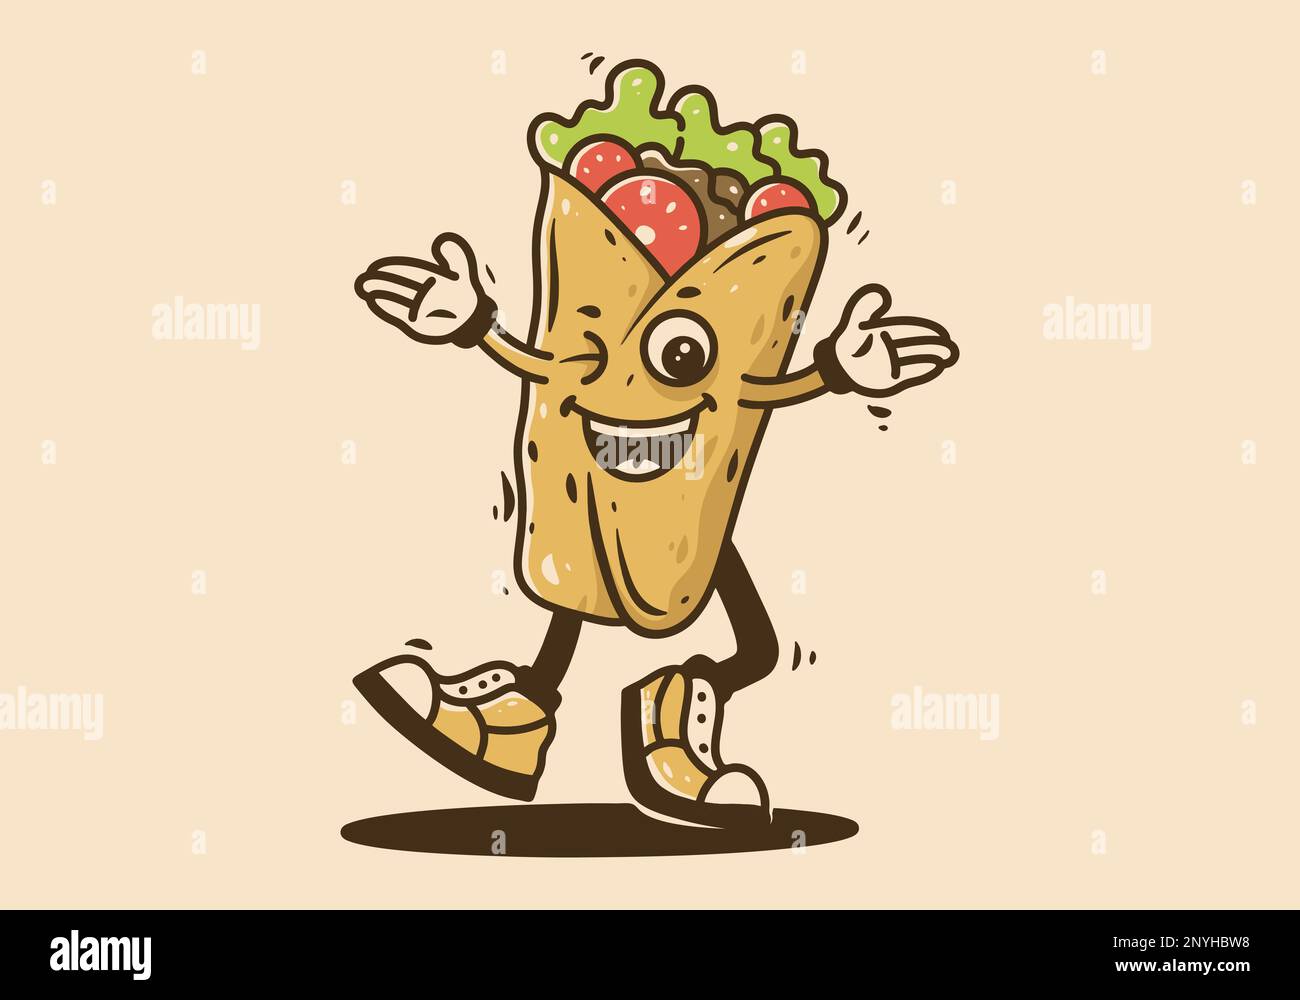 Mascot character design of walking mexican burritos with happy face Stock Vector